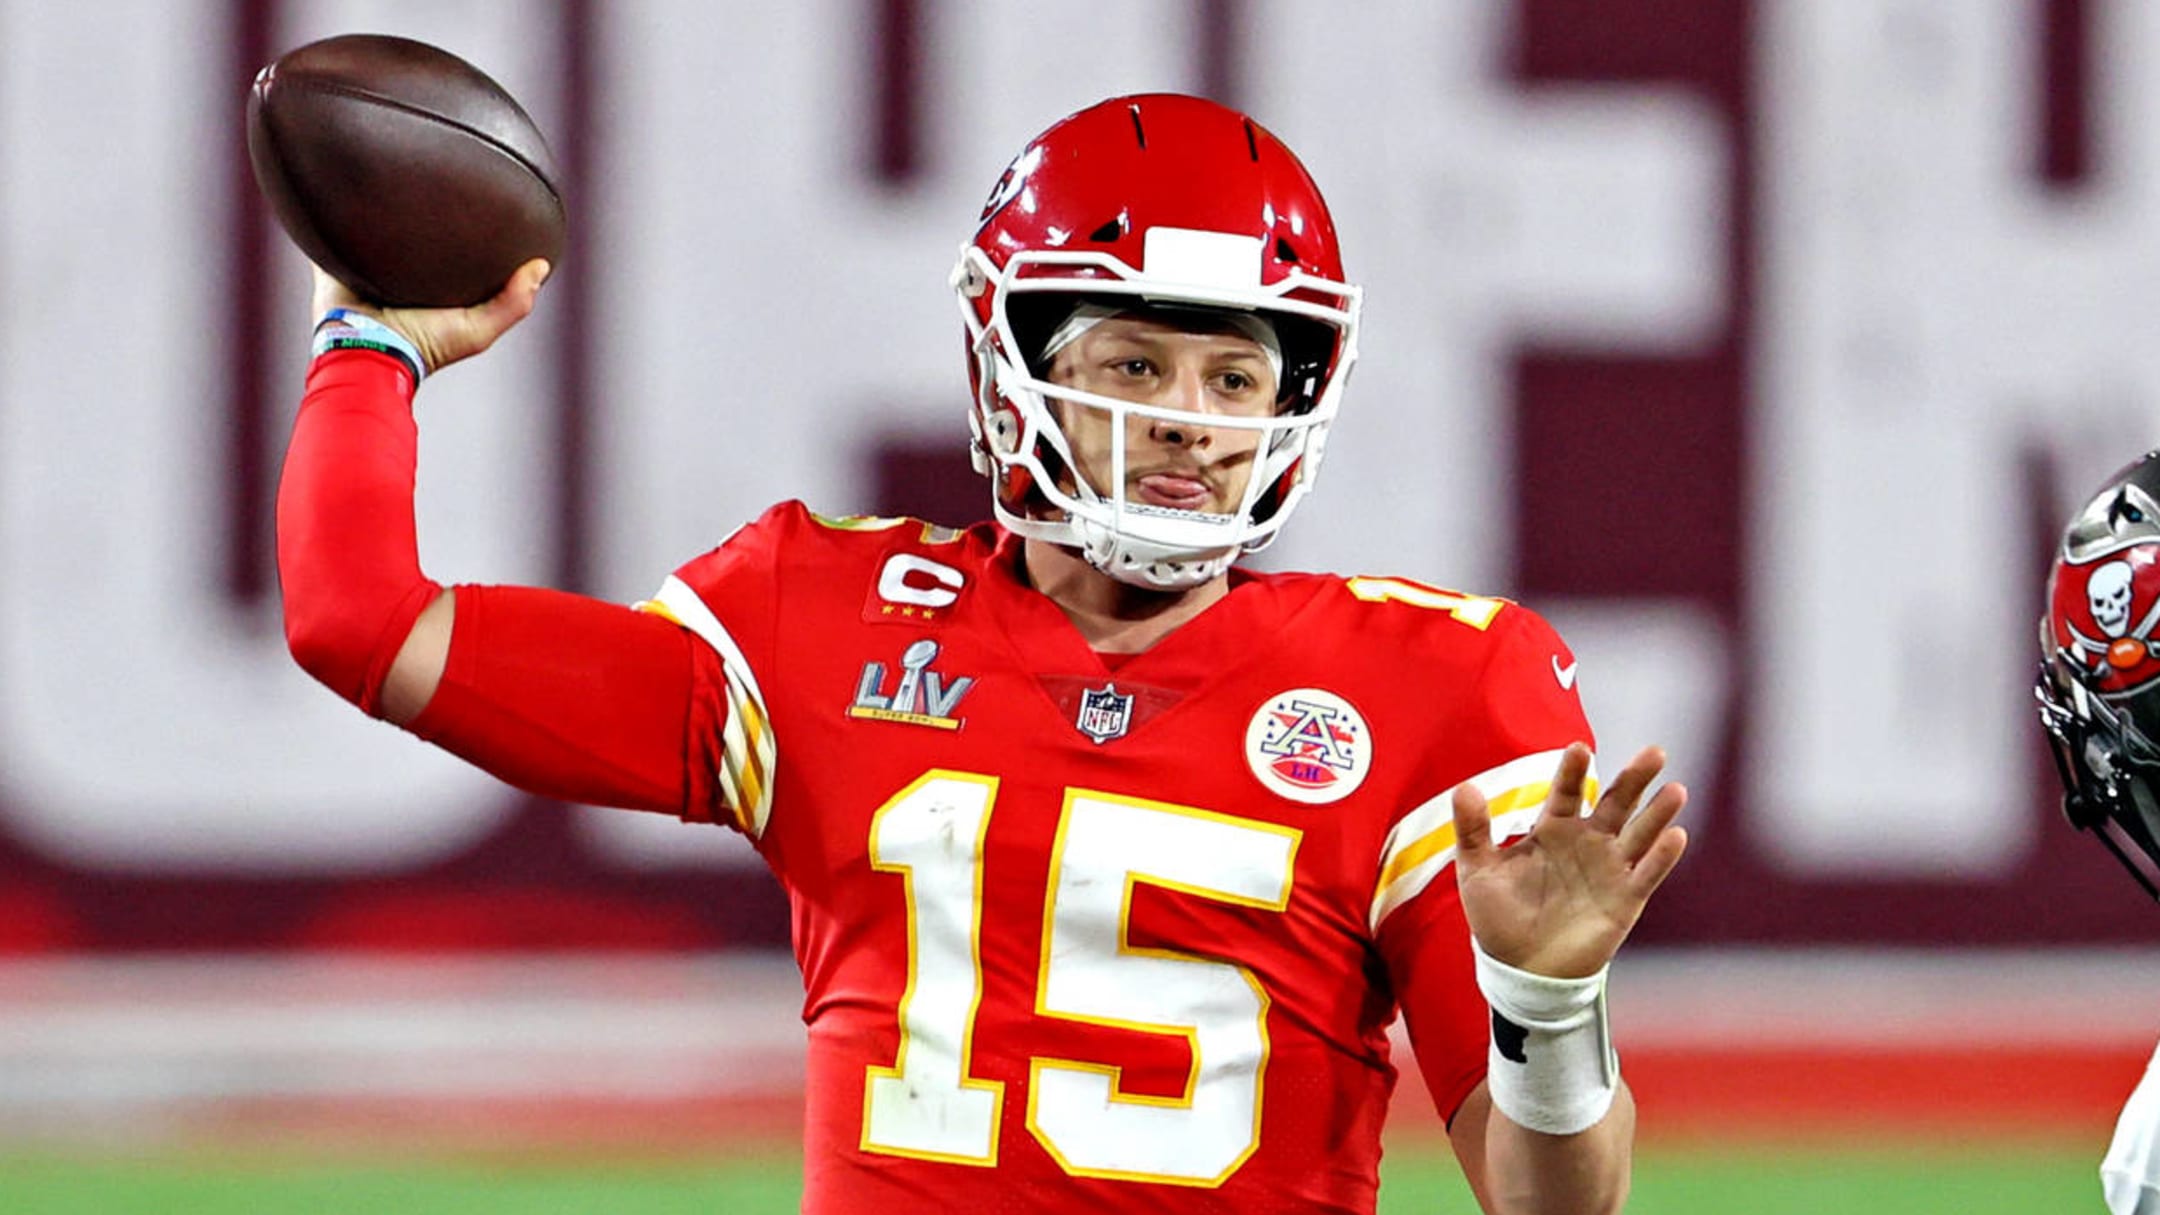 What's Really Going On With Patrick Mahomes' Walk?